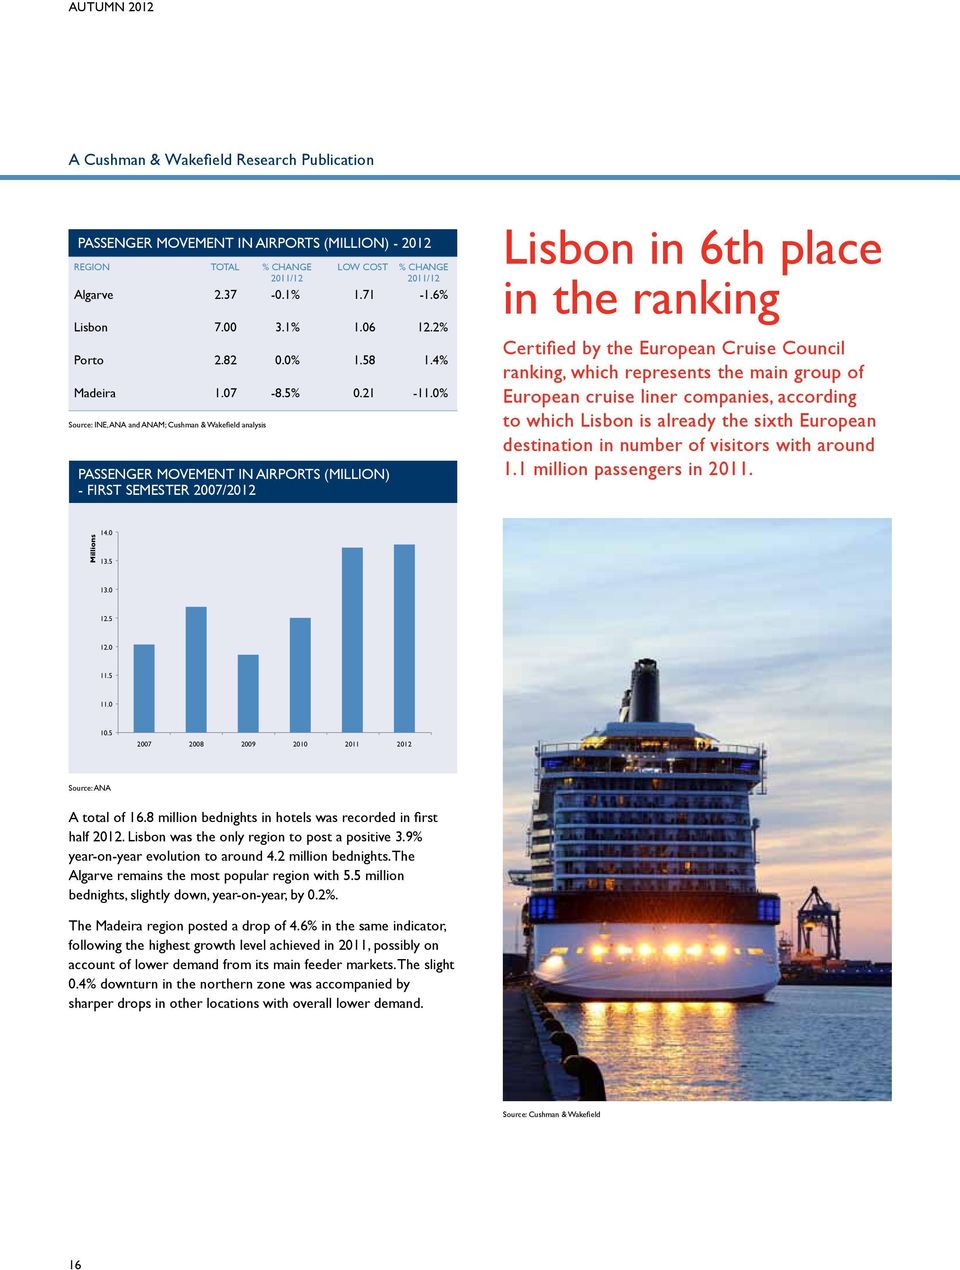 0% Source: INE, ANA and ANAM; Cushman & Wakefield analysis Passenger movement in airports (million) - First Semester 2007/2012 Lisbon in 6th place in the ranking Certified by the European Cruise